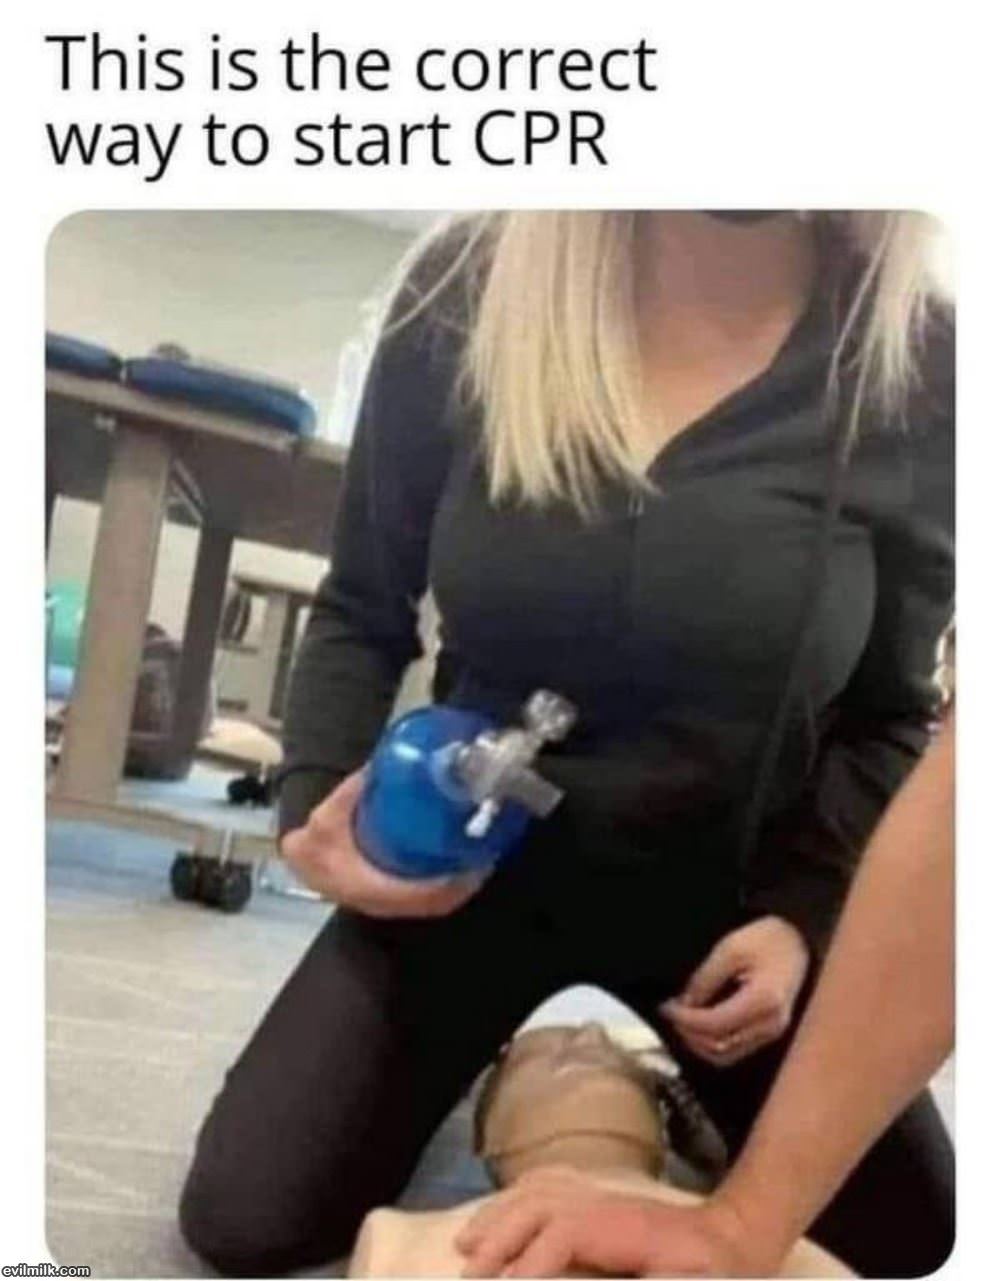 Some Cpr